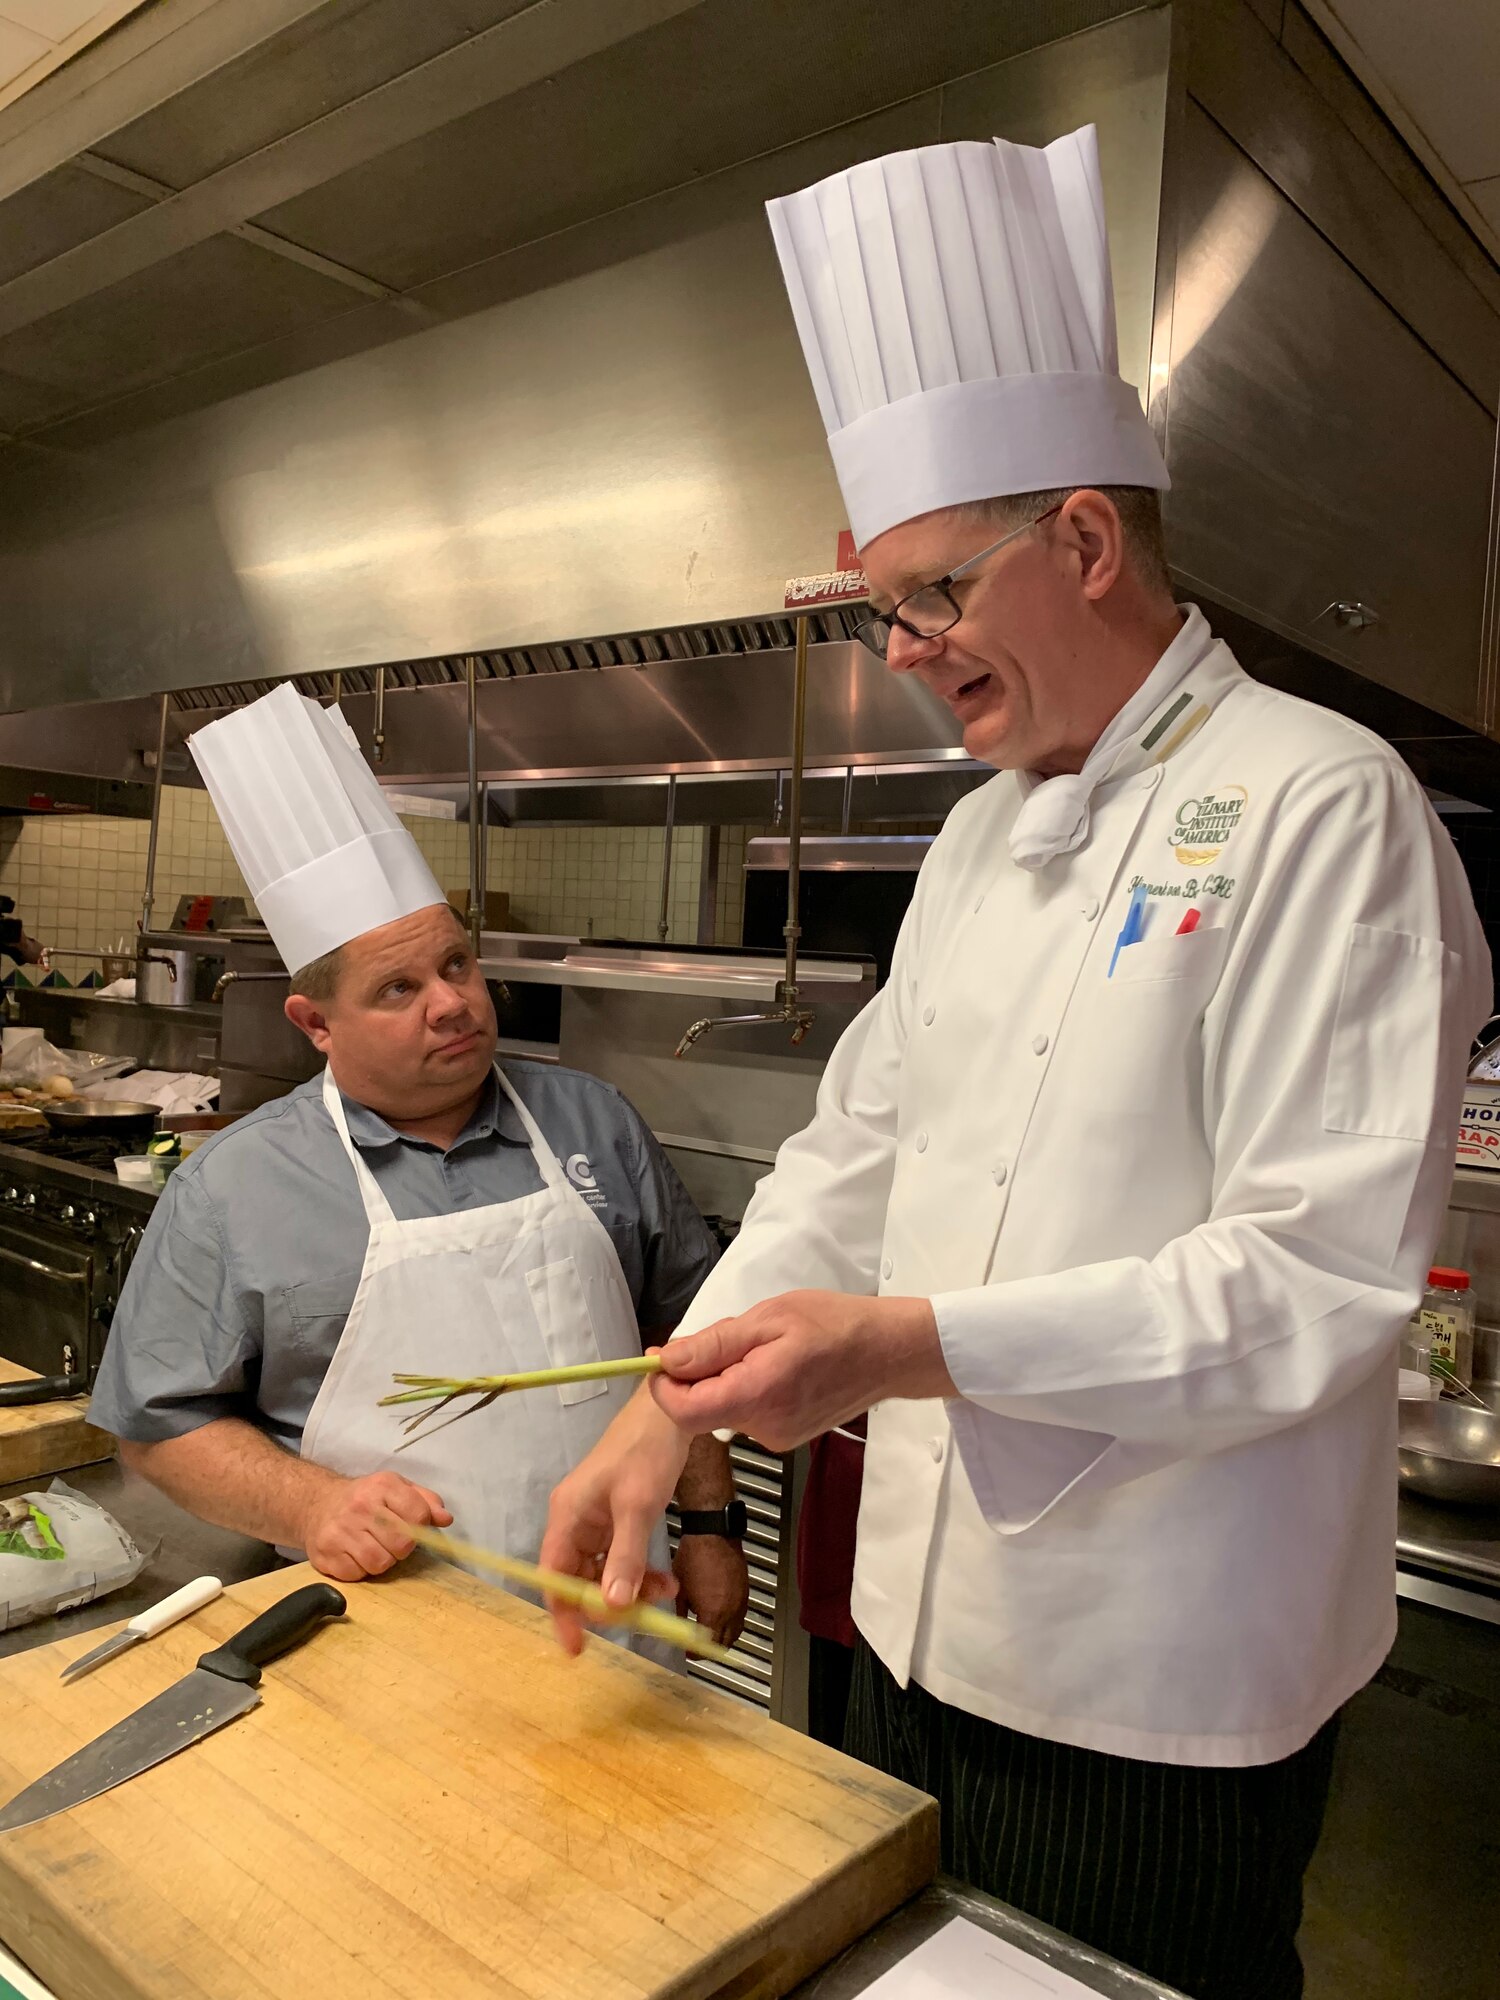 Culinary Institute of America Chef Hinnerk von Bargen demonstrates how to prepare lemon grass for chopping to cook Justin Lentz from Buckley Air Force Base, Colorado, during the practical portion of the new Air Force Techniques of Healthy Cooking Course at the CIA San Antonio campus, June 5, 2019. Lentz and 15 other nonappropriated fund employees from across the Air Force attended the course established by the Air Force Services Center, in partnership with the CIA San Antonio. The five-day course is designed to teach and demonstrate healthier ingredients, flavorful spicing and better cooking methods to deliver healthier menu choices at food service operations across installations, not just at dining facilities. (U.S. Air Force photo by Debbie Aragon)